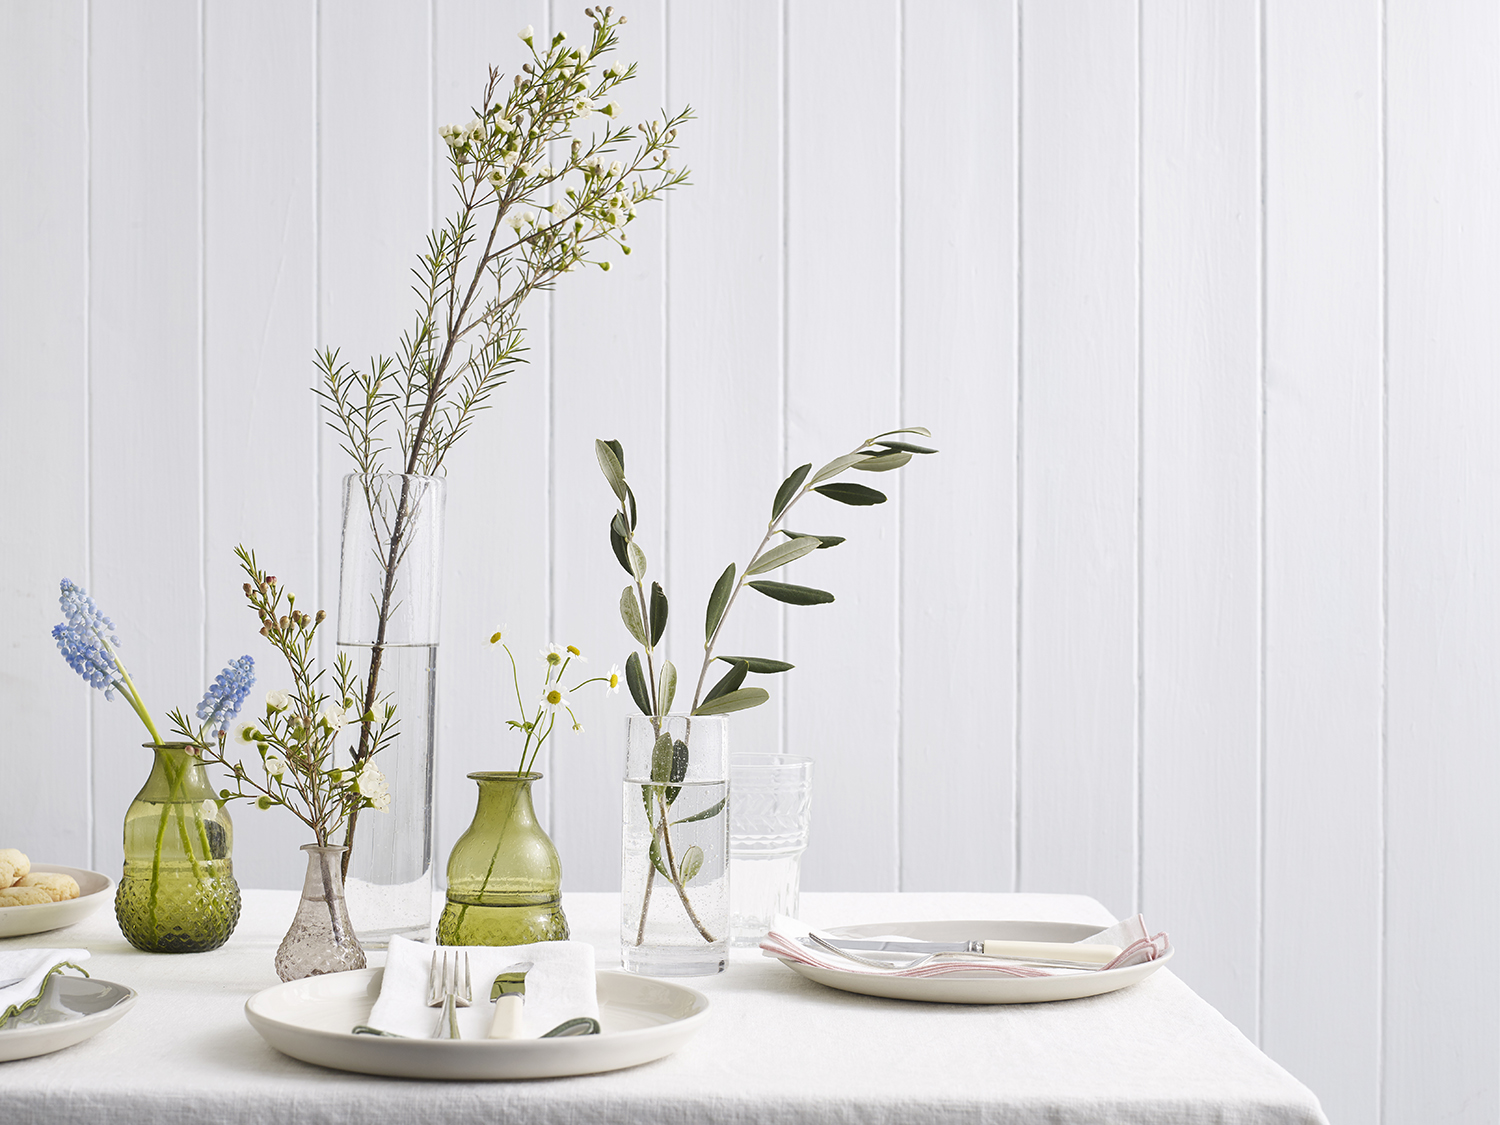 Styling with spring flowers and indie homeware products